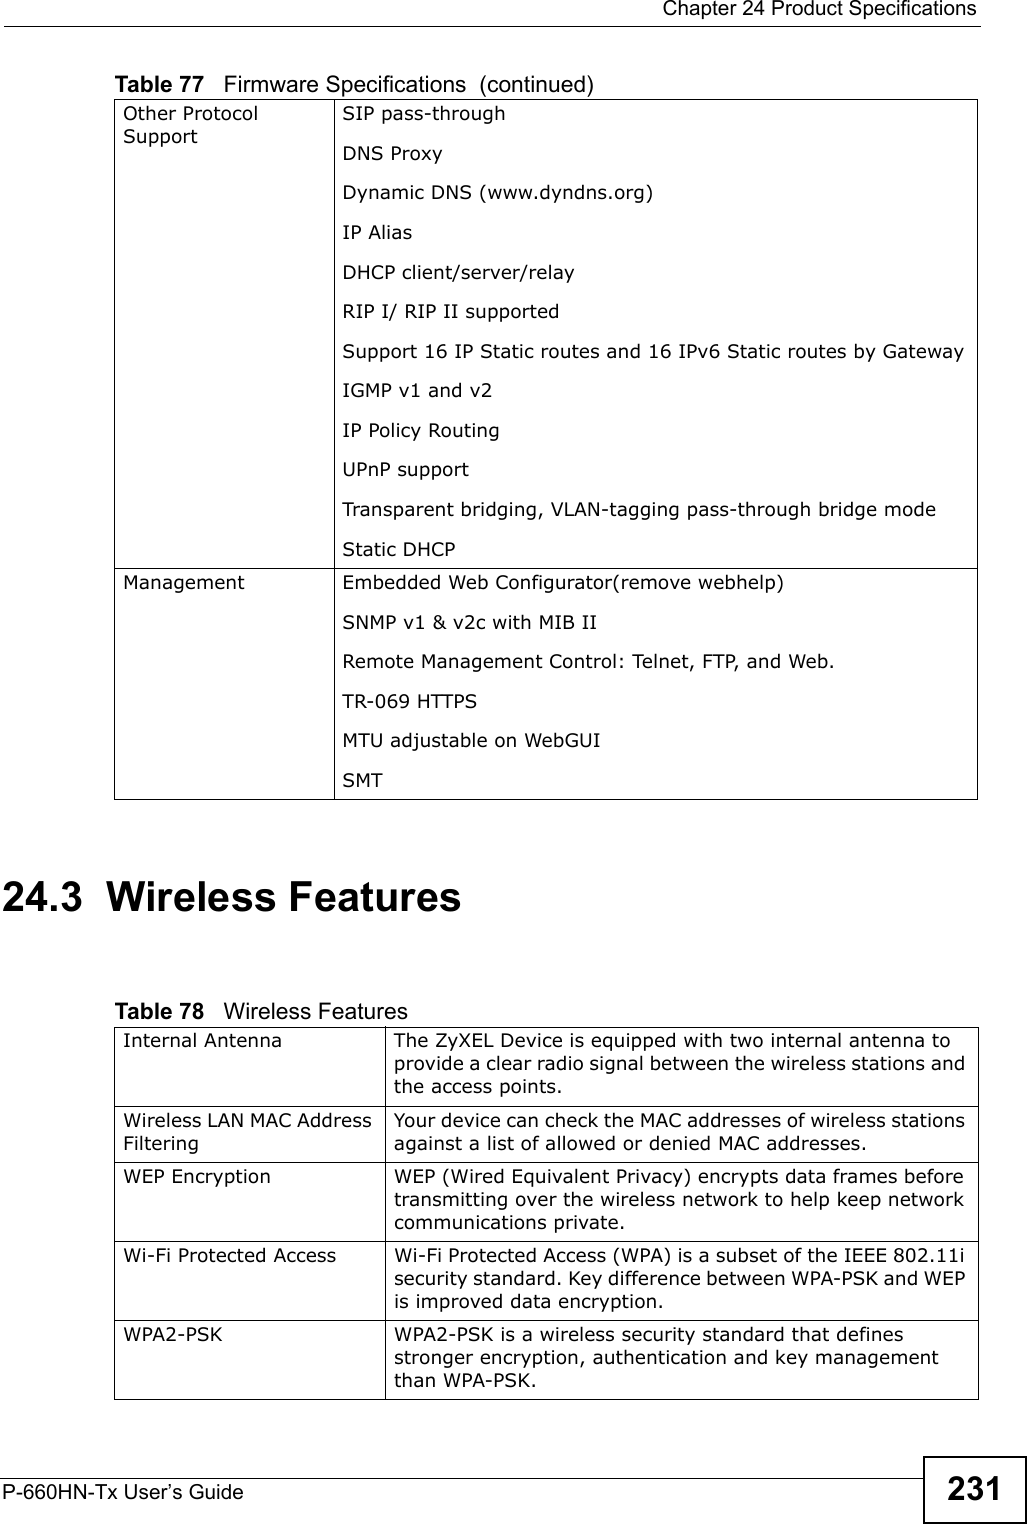  Chapter 24 Product SpecificationsP-660HN-Tx User’s Guide 23124.3  Wireless Features Other Protocol SupportSIP pass-throughDNS ProxyDynamic DNS (www.dyndns.org)IP AliasDHCP client/server/relayRIP I/ RIP II supportedSupport 16 IP Static routes and 16 IPv6 Static routes by GatewayIGMP v1 and v2 IP Policy RoutingUPnP support Transparent bridging, VLAN-tagging pass-through bridge modeStatic DHCPManagement Embedded Web Configurator(remove webhelp)SNMP v1 &amp; v2c with MIB IIRemote Management Control: Telnet, FTP, and Web.TR-069 HTTPSMTU adjustable on WebGUISMTTable 77   Firmware Specifications  (continued)Table 78   Wireless FeaturesInternal Antenna  The ZyXEL Device is equipped with two internal antenna to provide a clear radio signal between the wireless stations and the access points.Wireless LAN MAC Address Filtering Your device can check the MAC addresses of wireless stations against a list of allowed or denied MAC addresses.WEP Encryption WEP (Wired Equivalent Privacy) encrypts data frames before transmitting over the wireless network to help keep network communications private.Wi-Fi Protected Access  Wi-Fi Protected Access (WPA) is a subset of the IEEE 802.11i security standard. Key difference between WPA-PSK and WEP is improved data encryption.WPA2-PSK  WPA2-PSK is a wireless security standard that defines stronger encryption, authentication and key management than WPA-PSK.